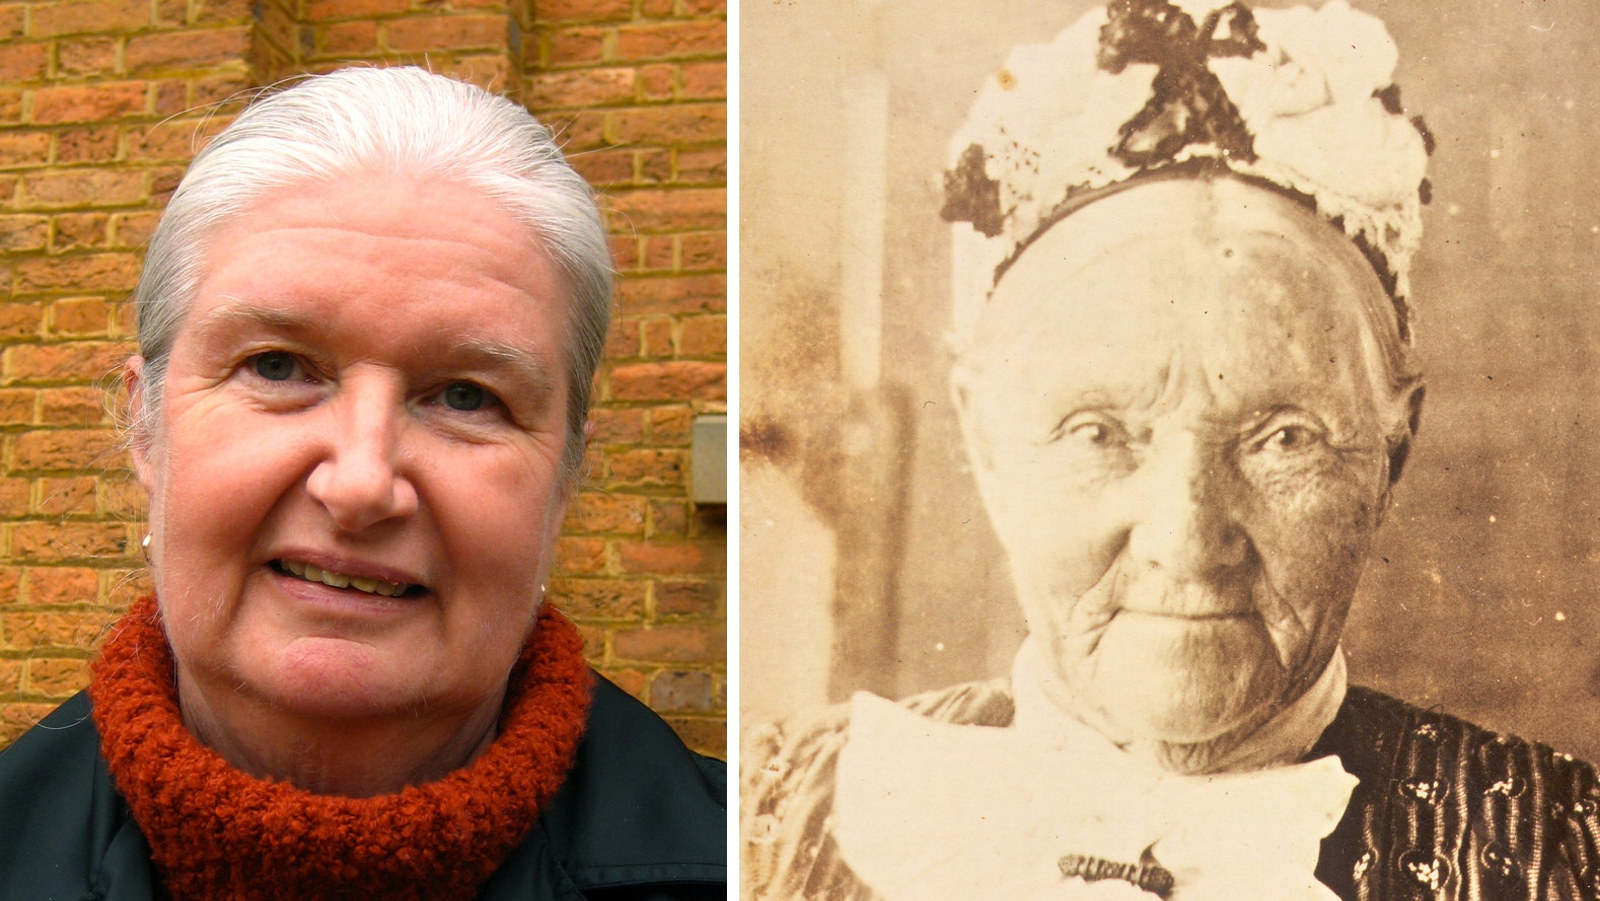 Combined photo portrait featuring contemporary image of woman and historic photo of an older woman wearing a floral decorated hat and lace collar.